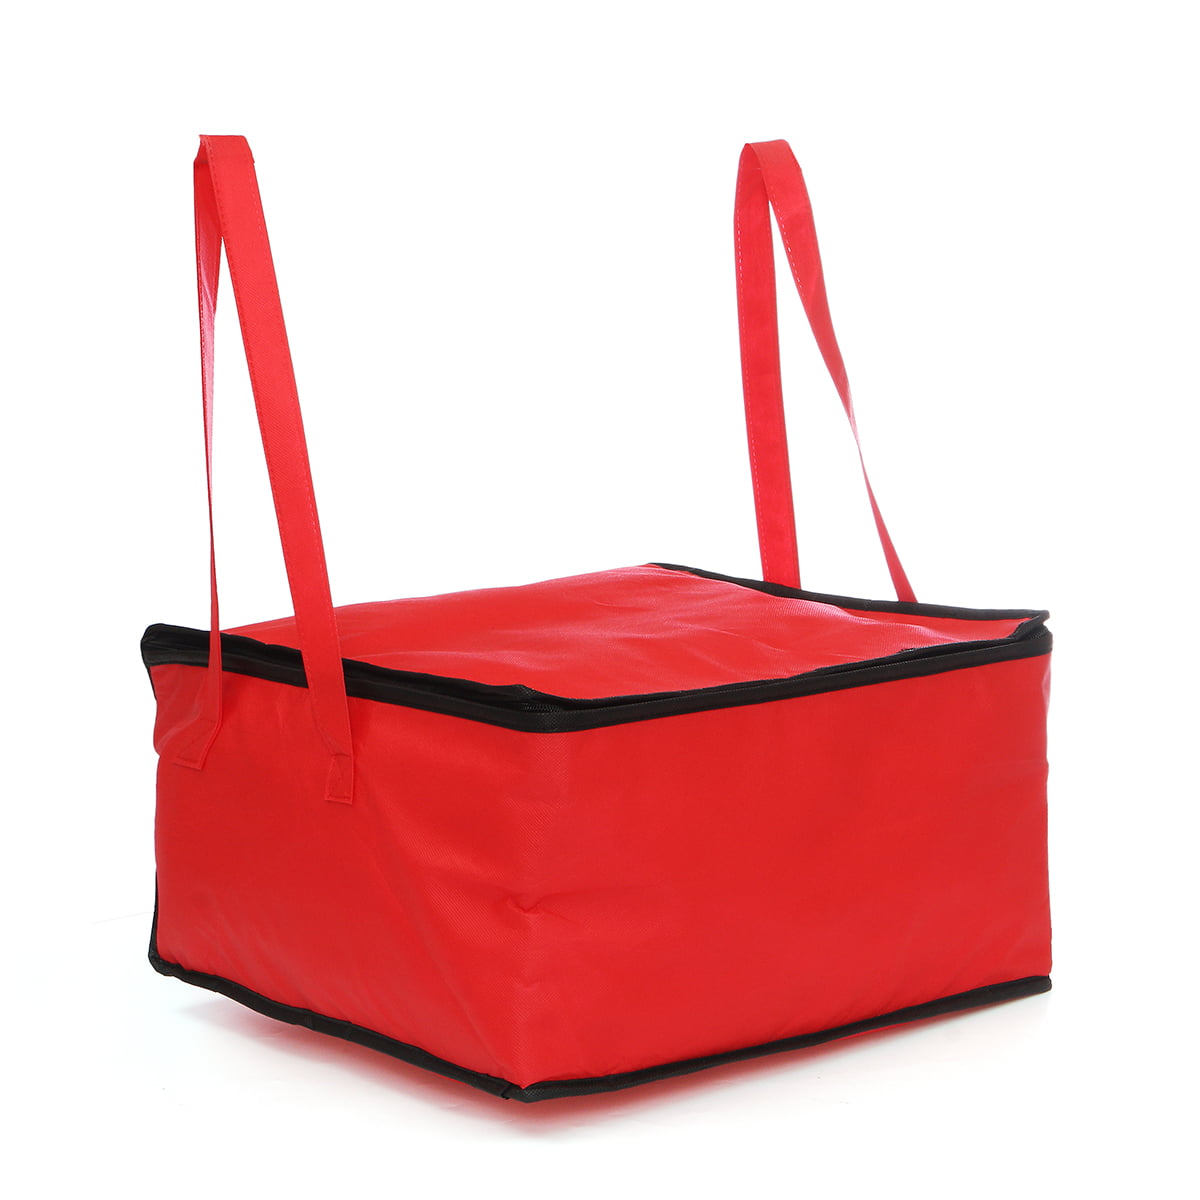 Hot Food Thermal Insulated Delivery Bags Warm Food Foldaway Takeaway Picnic Tote 